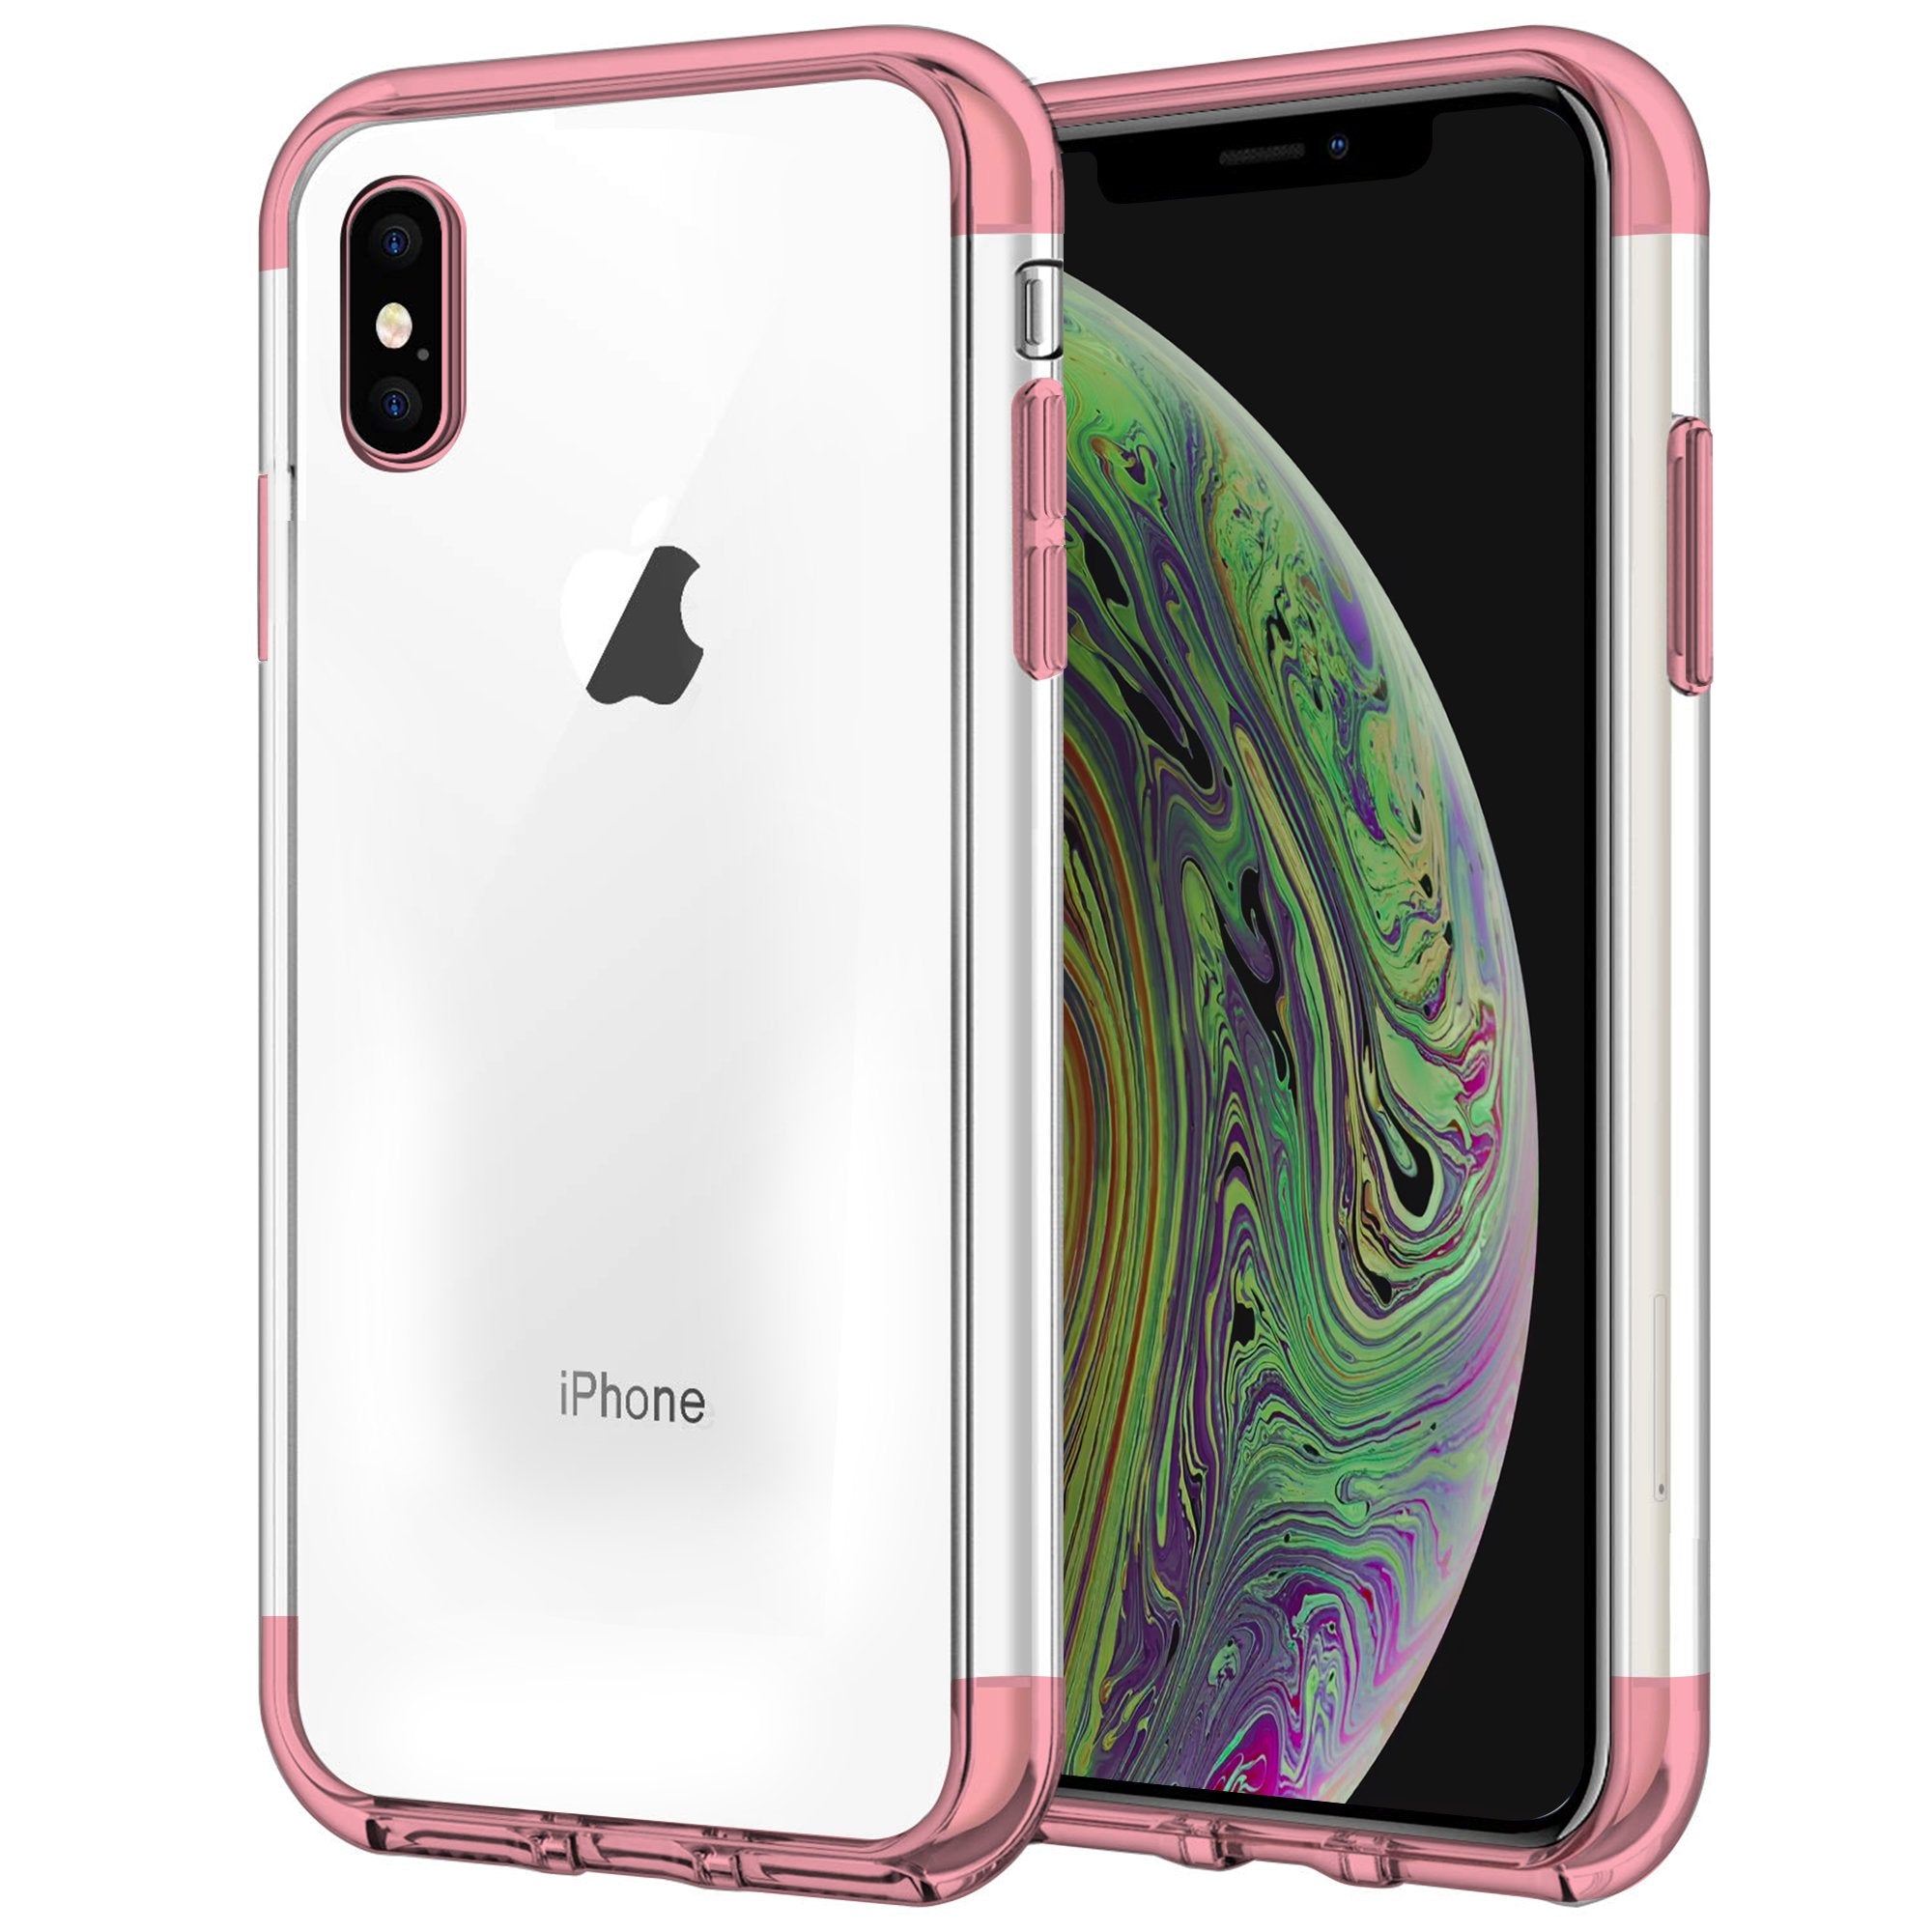 Case for iPhone XS Max Shock Proof Soft TPU Silicone Phone Clear Slim Cover